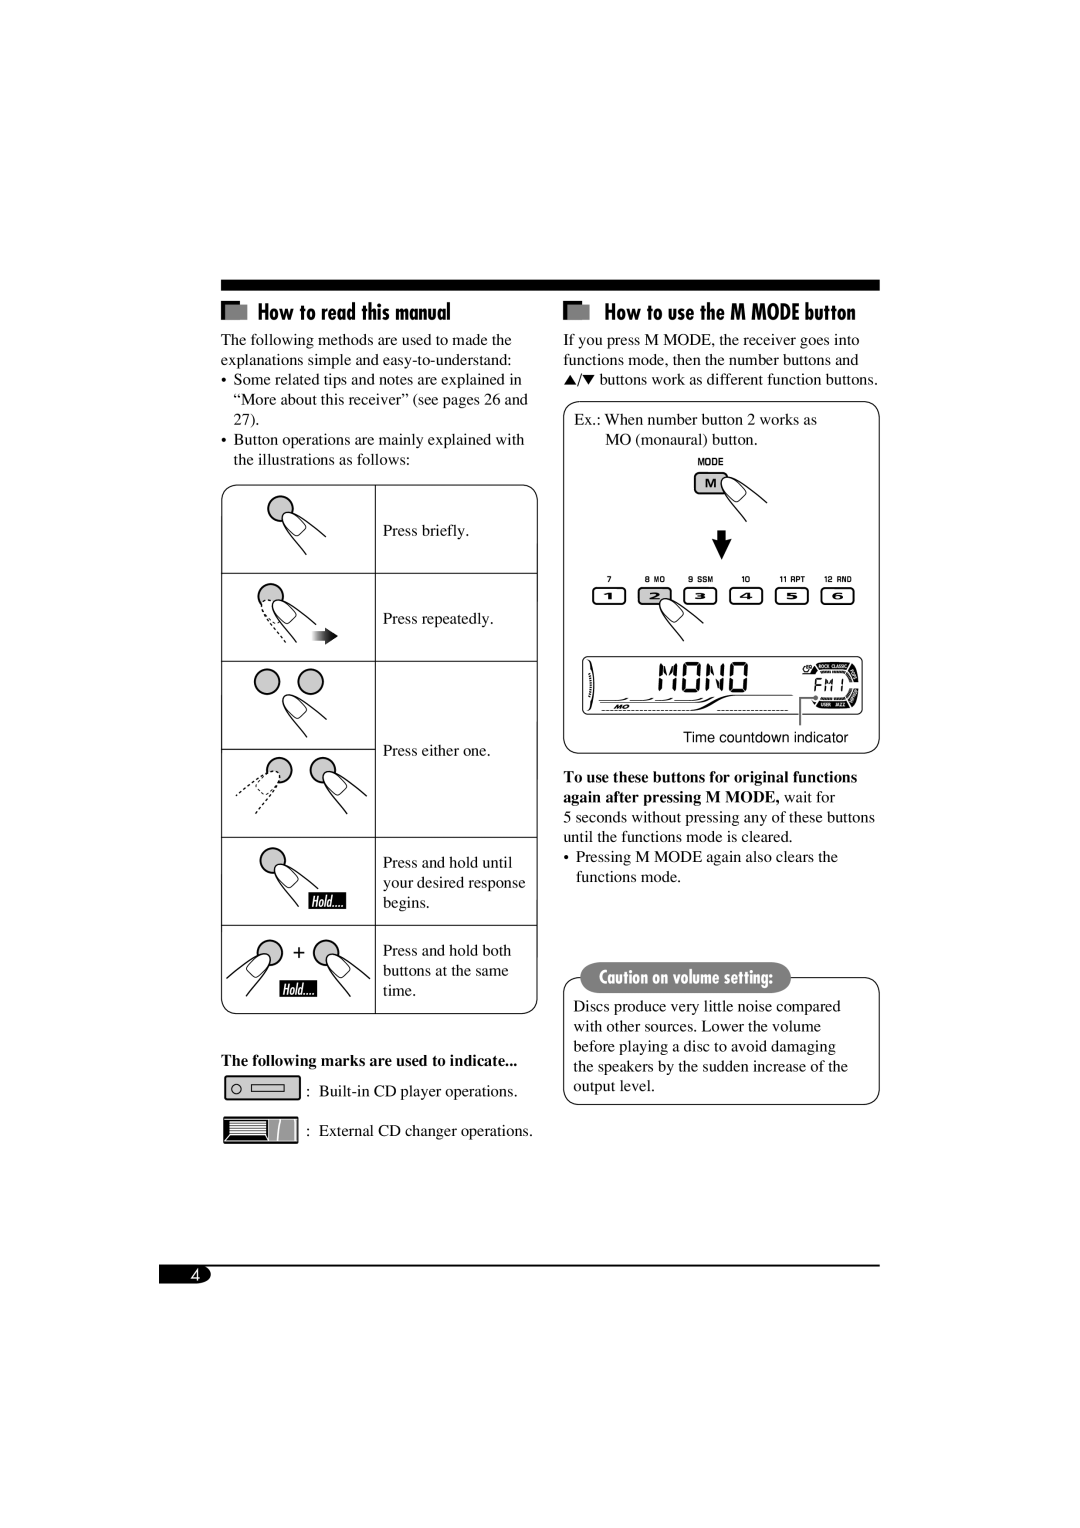 JVC KD-G614, GET0305-001A, KD-G514 How to read this manual, How to use the M MODE button, Caution on volume setting 